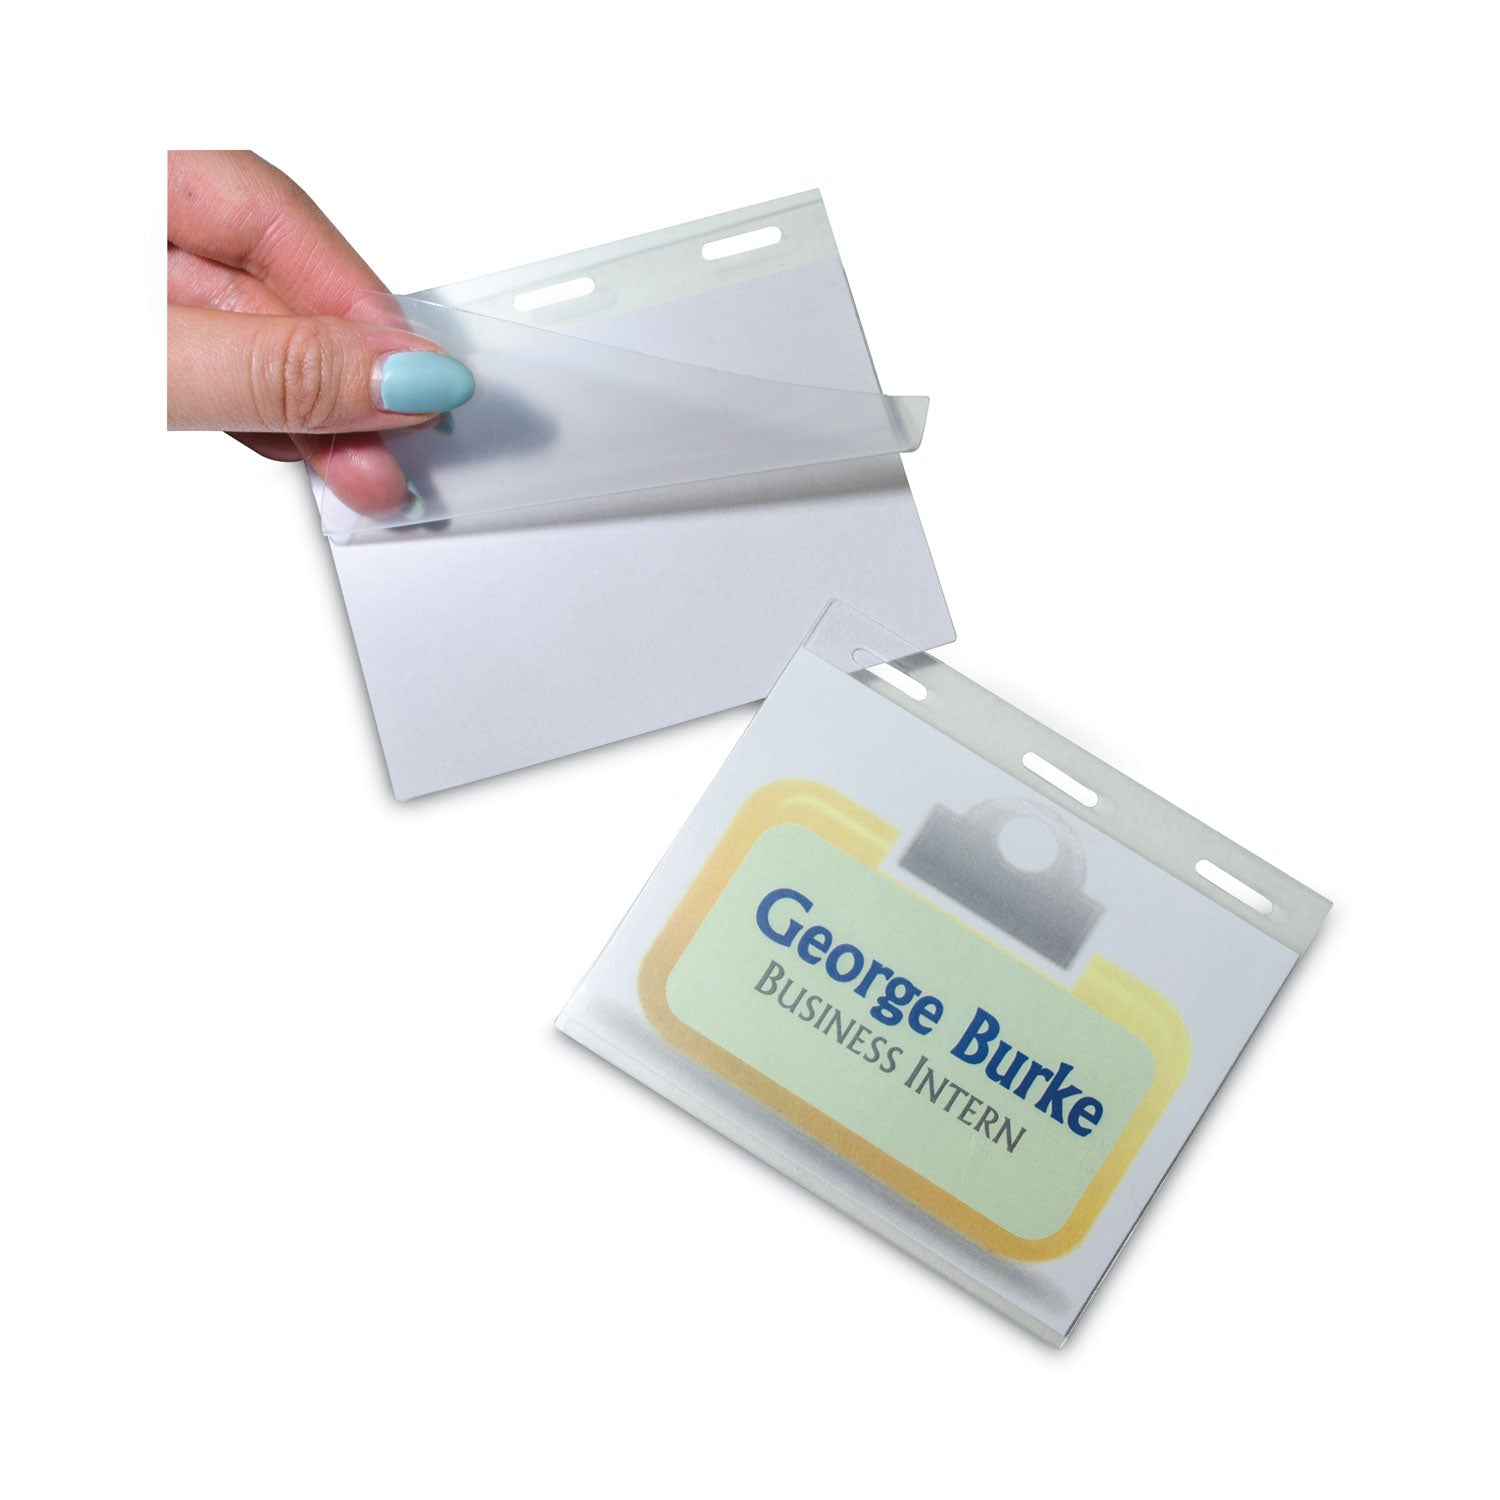 self-laminating-magnetic-style-name-badge-holder-kit-3-x-4-clear-20-box_cli92843 - 4